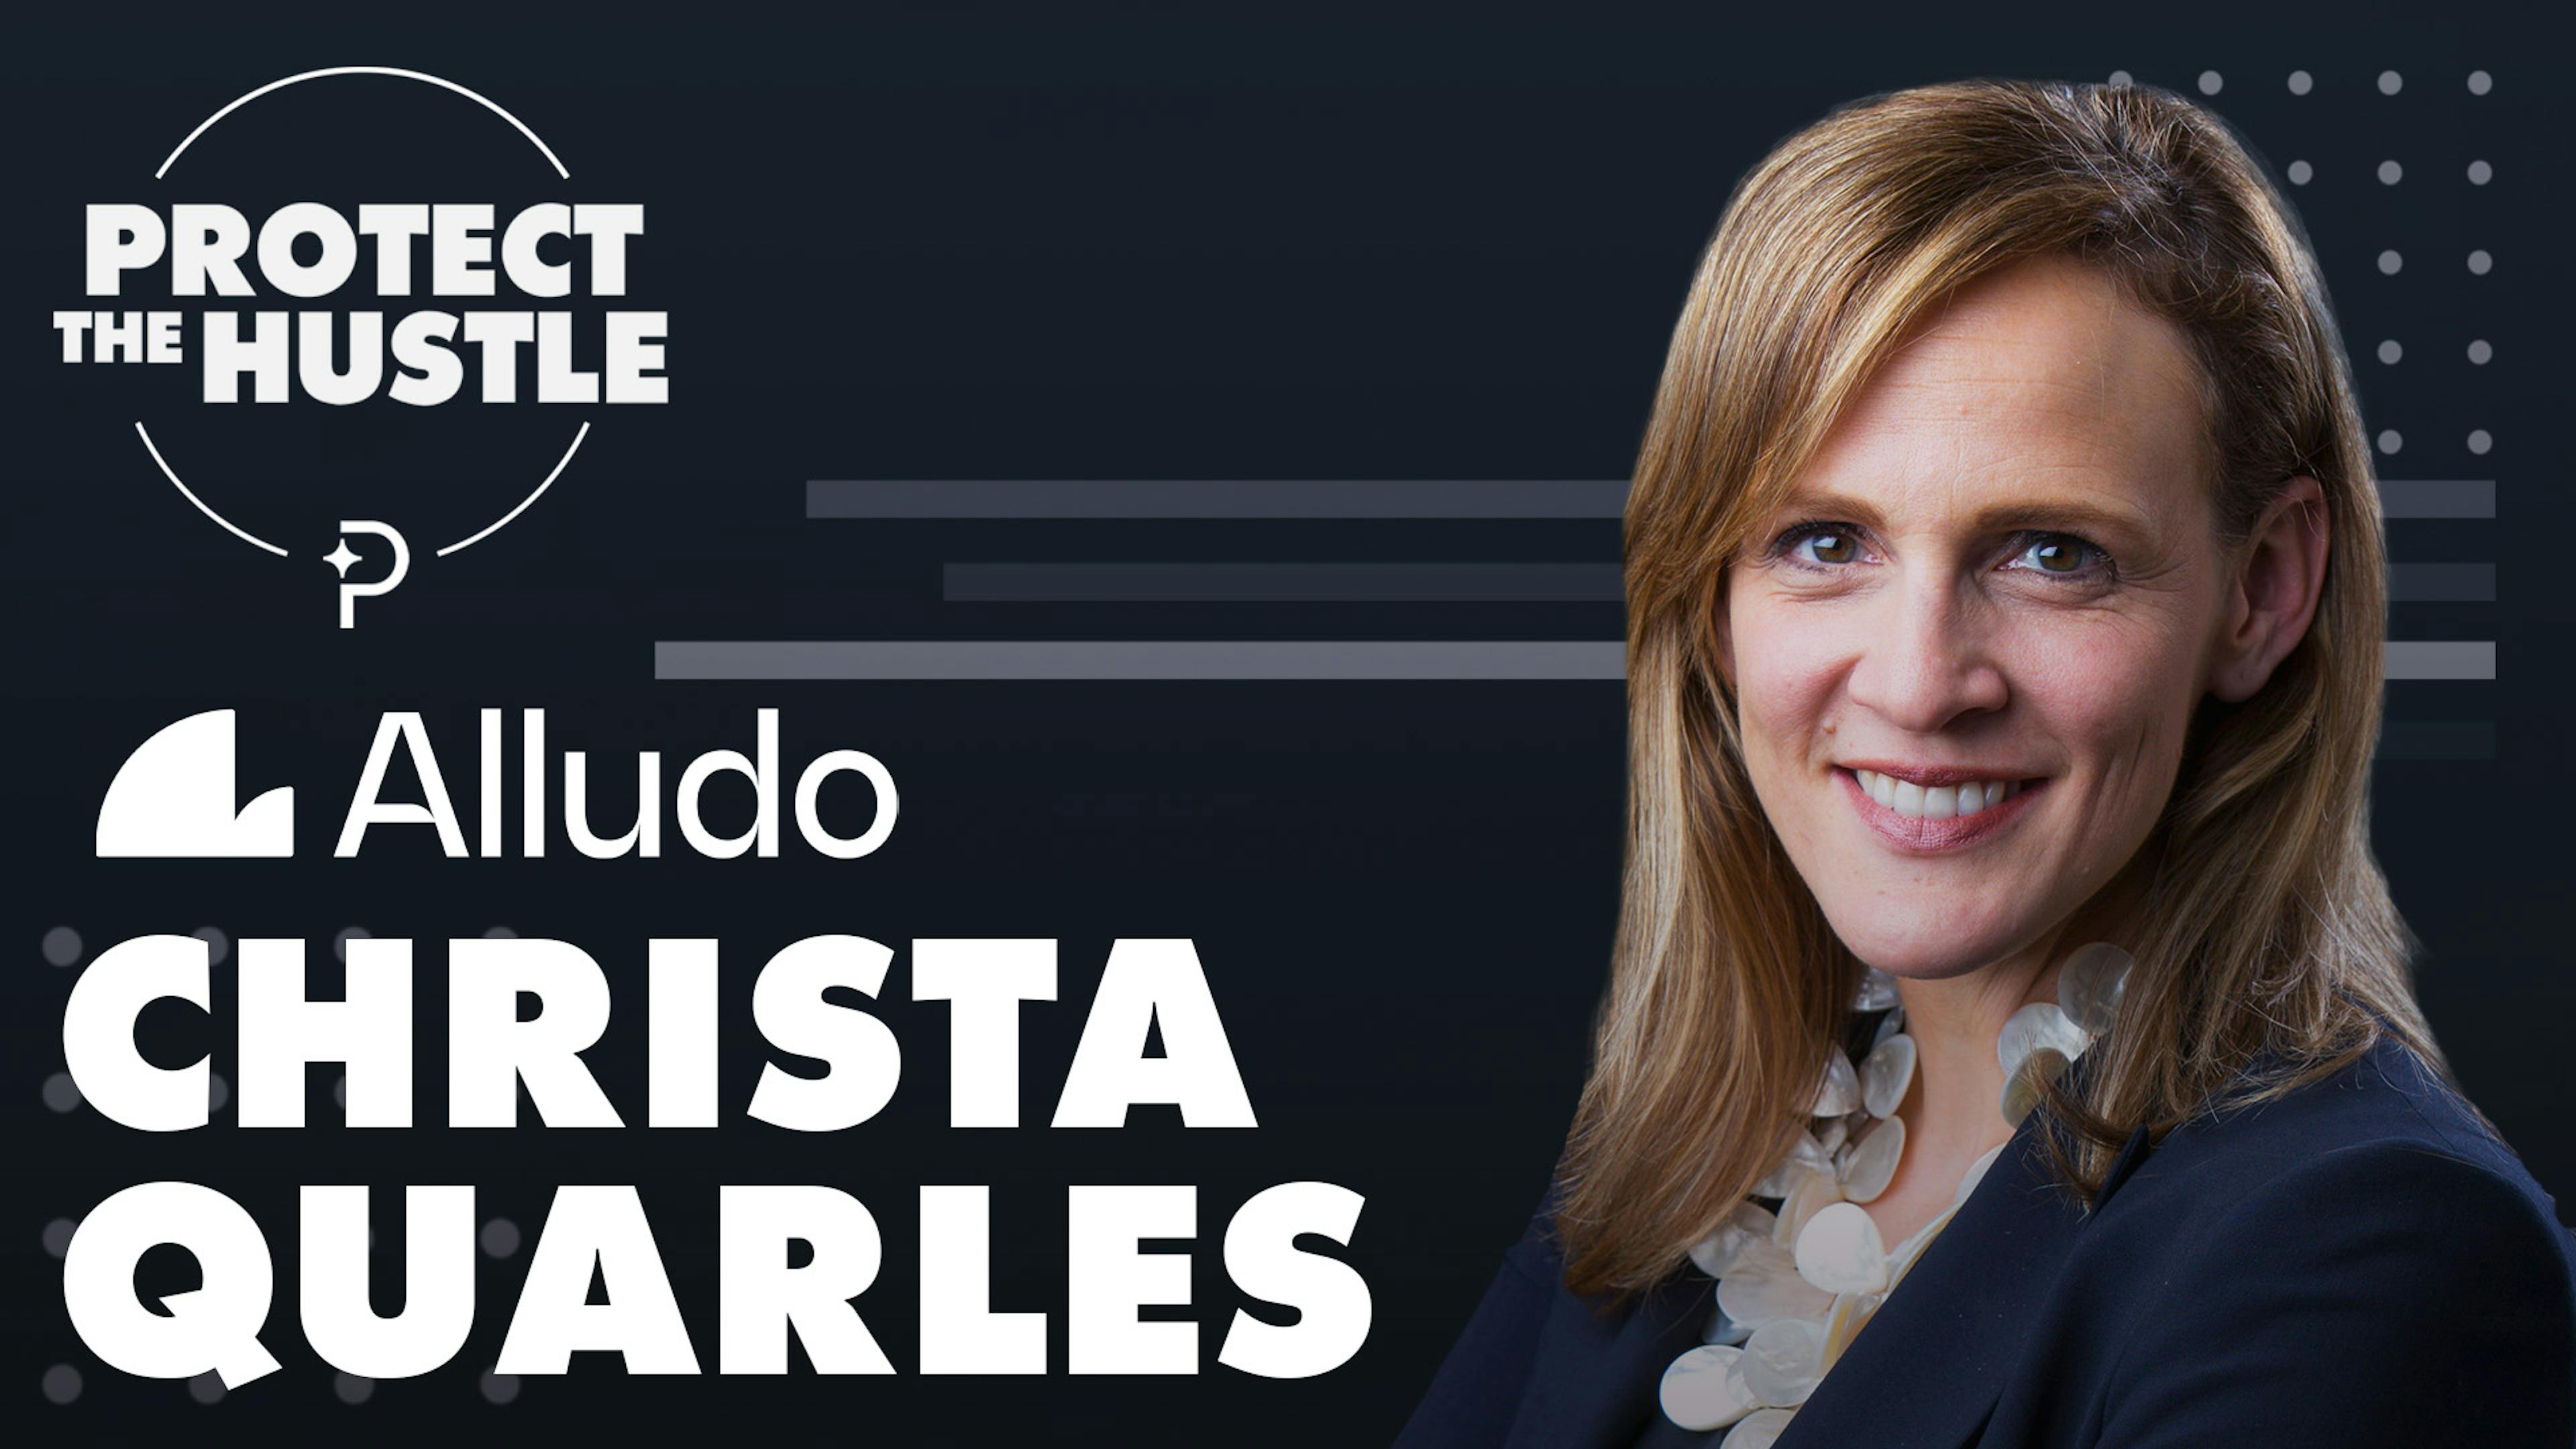 Protect the Hustle thumbnail featuring Alludo's Christa Quarles